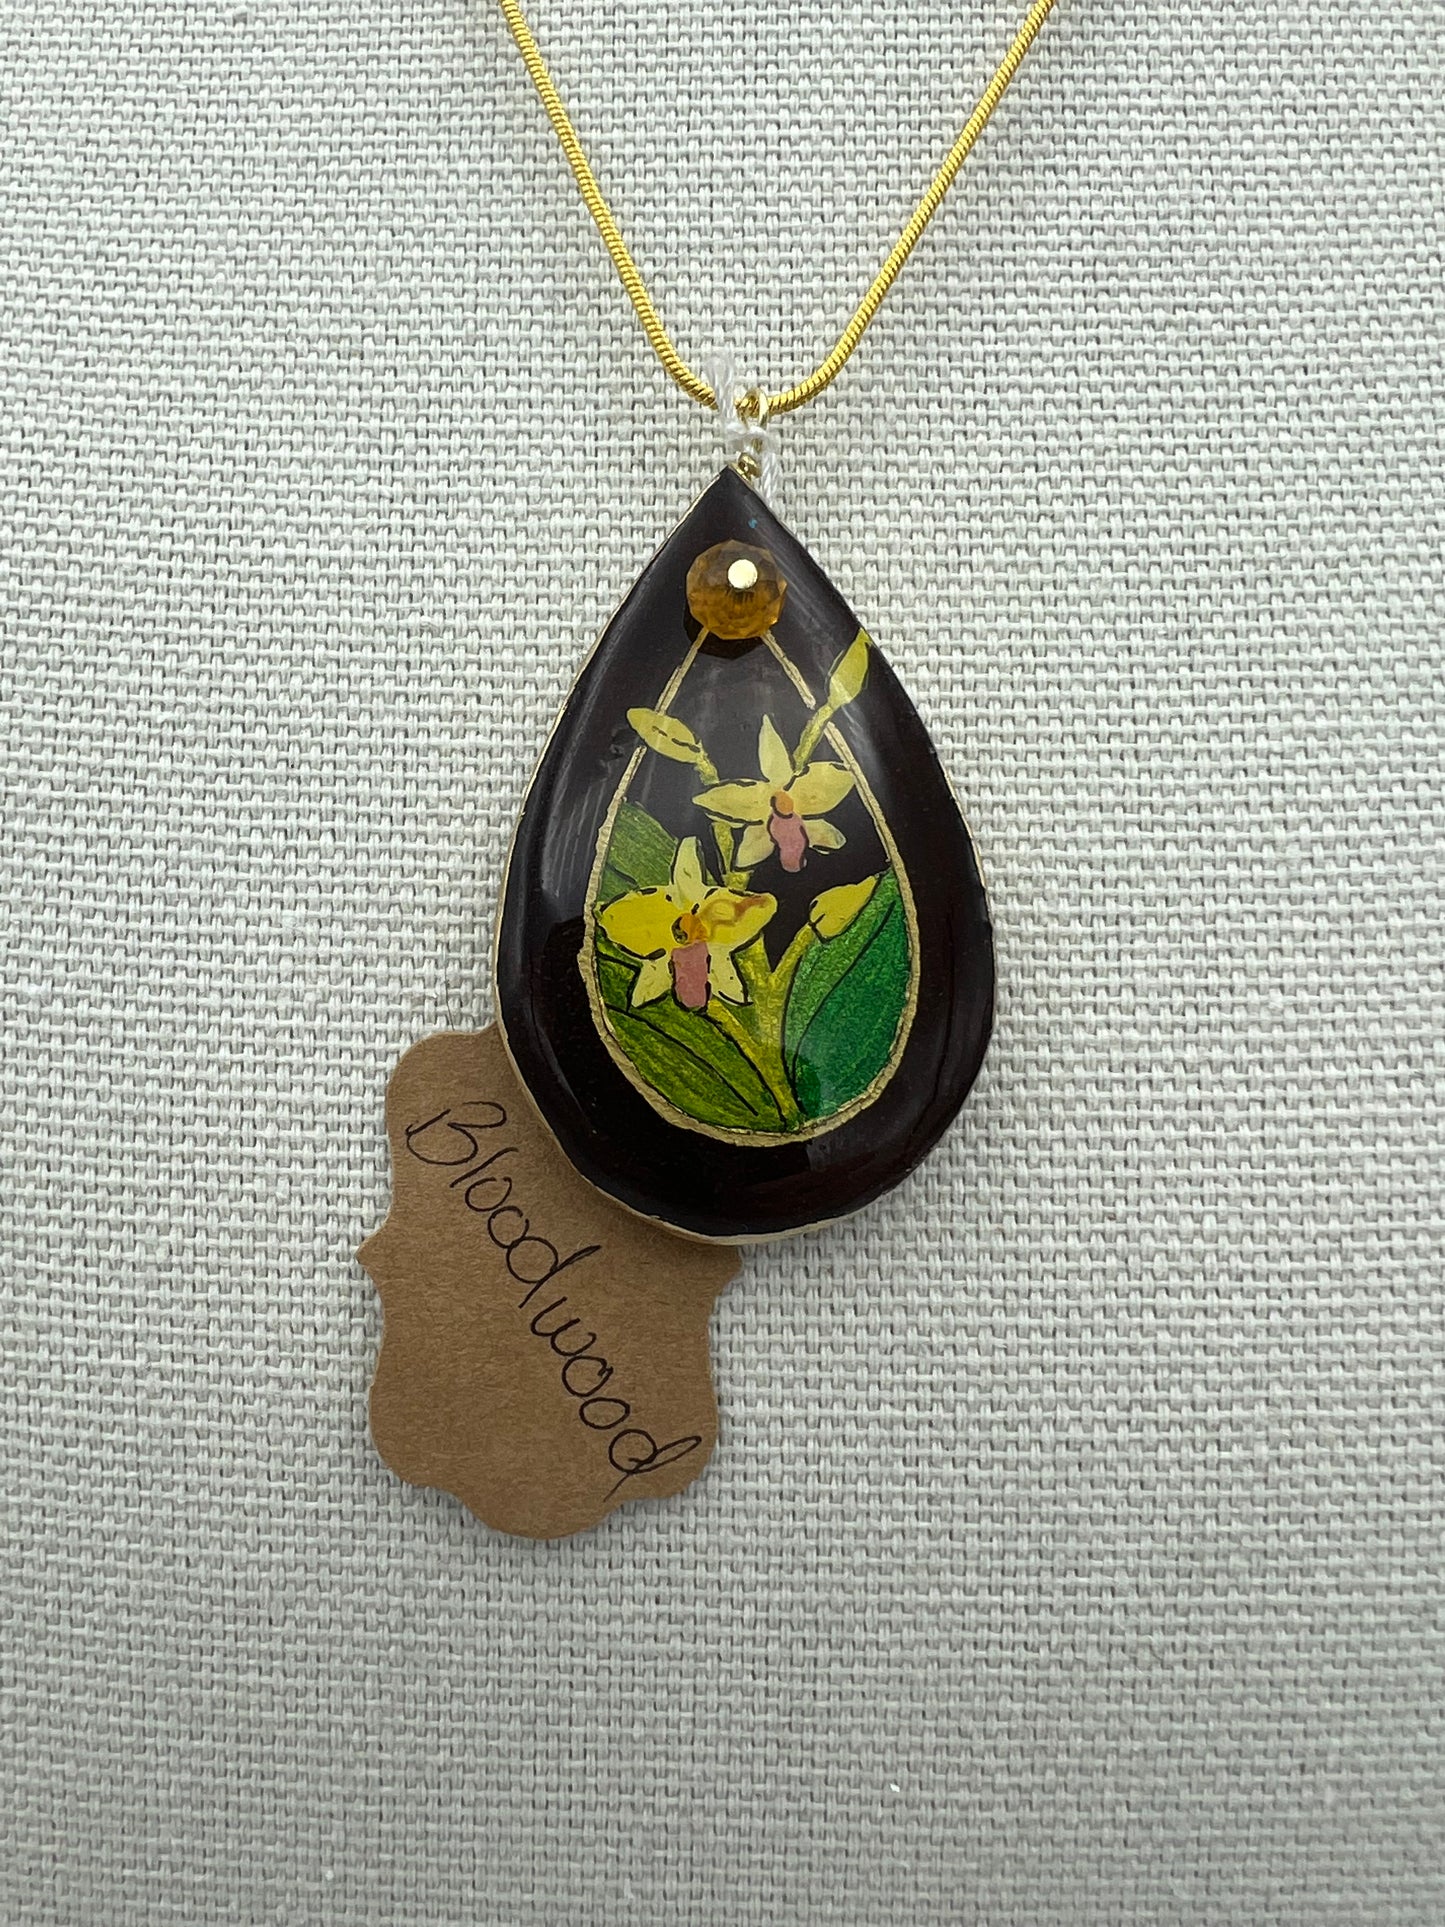 Yellow Orchids on Bloodwood - Wooden Pendant Necklace